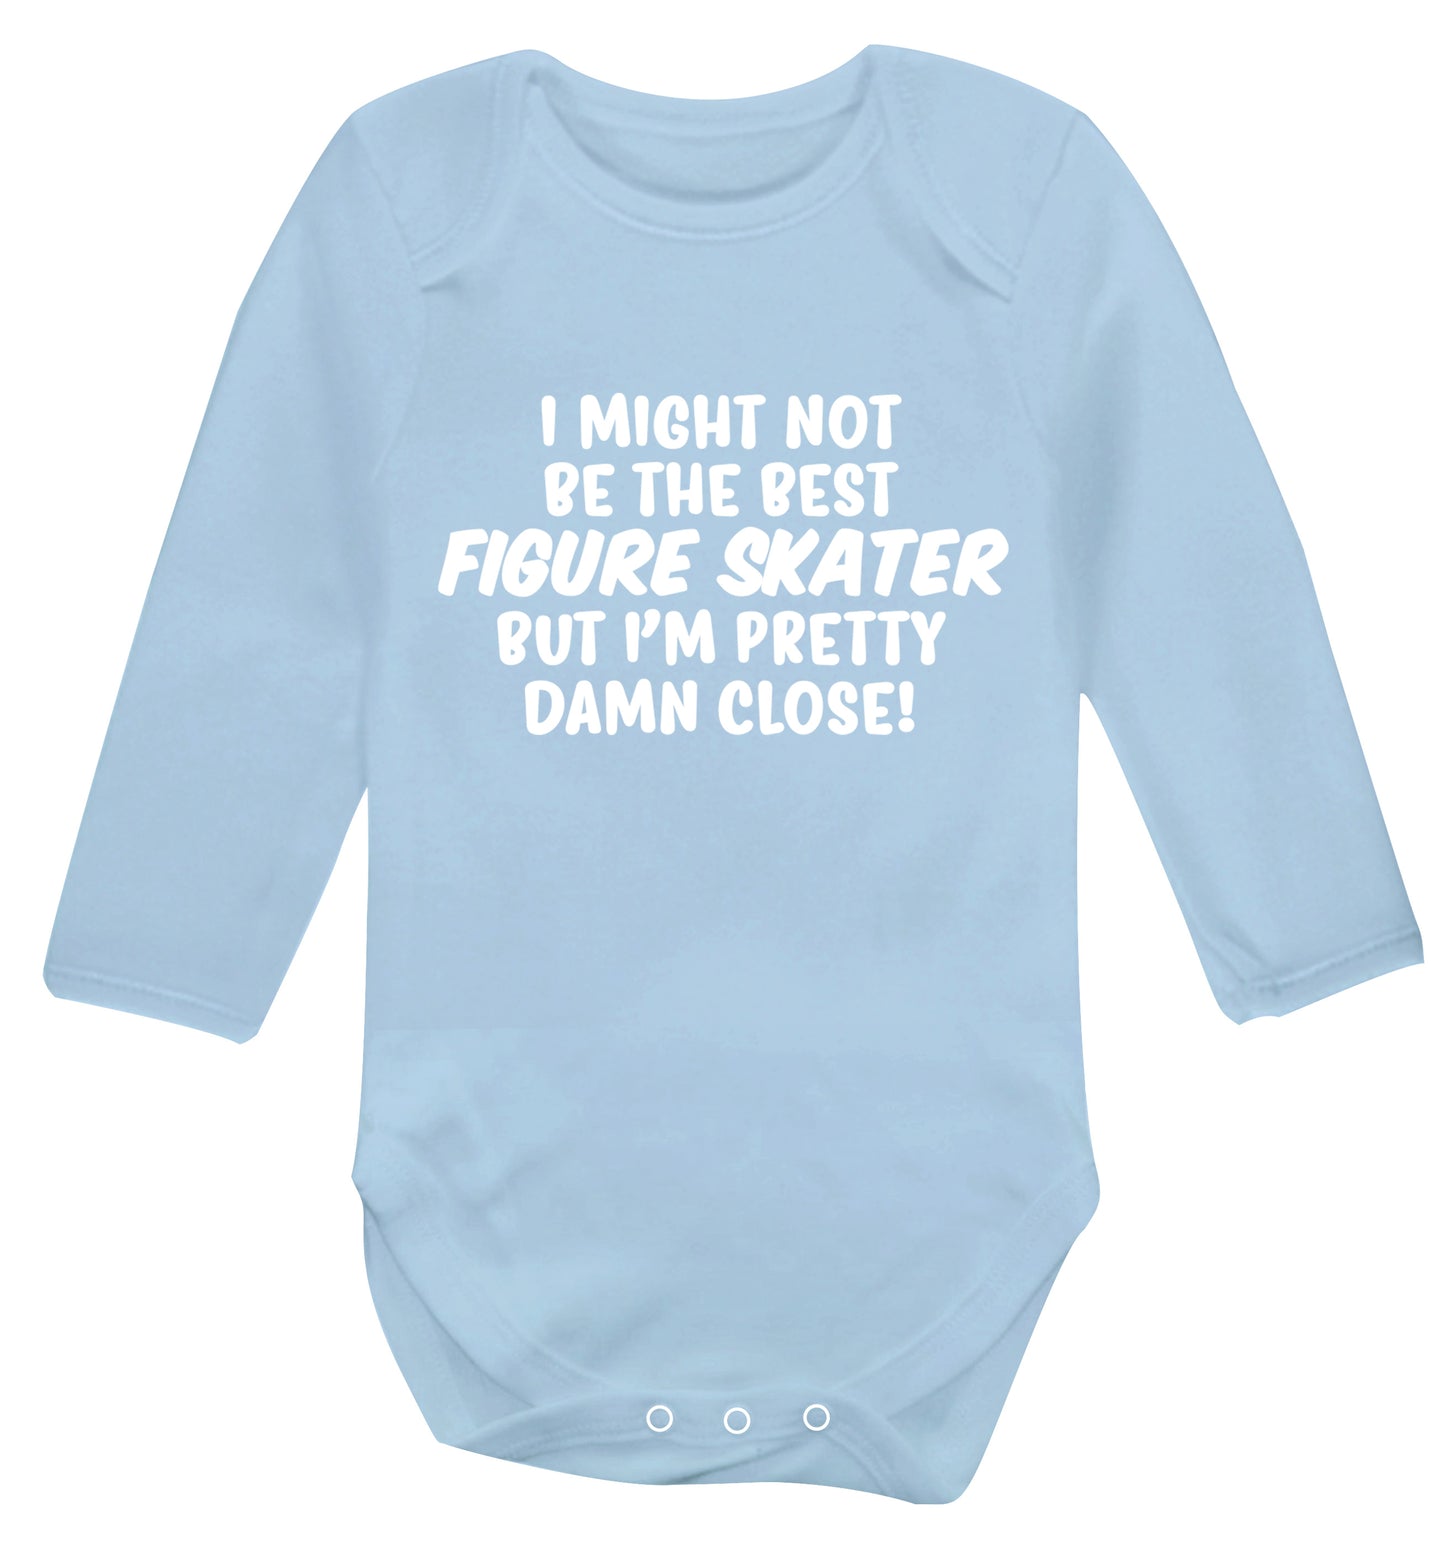 I might not be the best figure skater but I'm pretty damn close! Baby Vest long sleeved pale blue 6-12 months